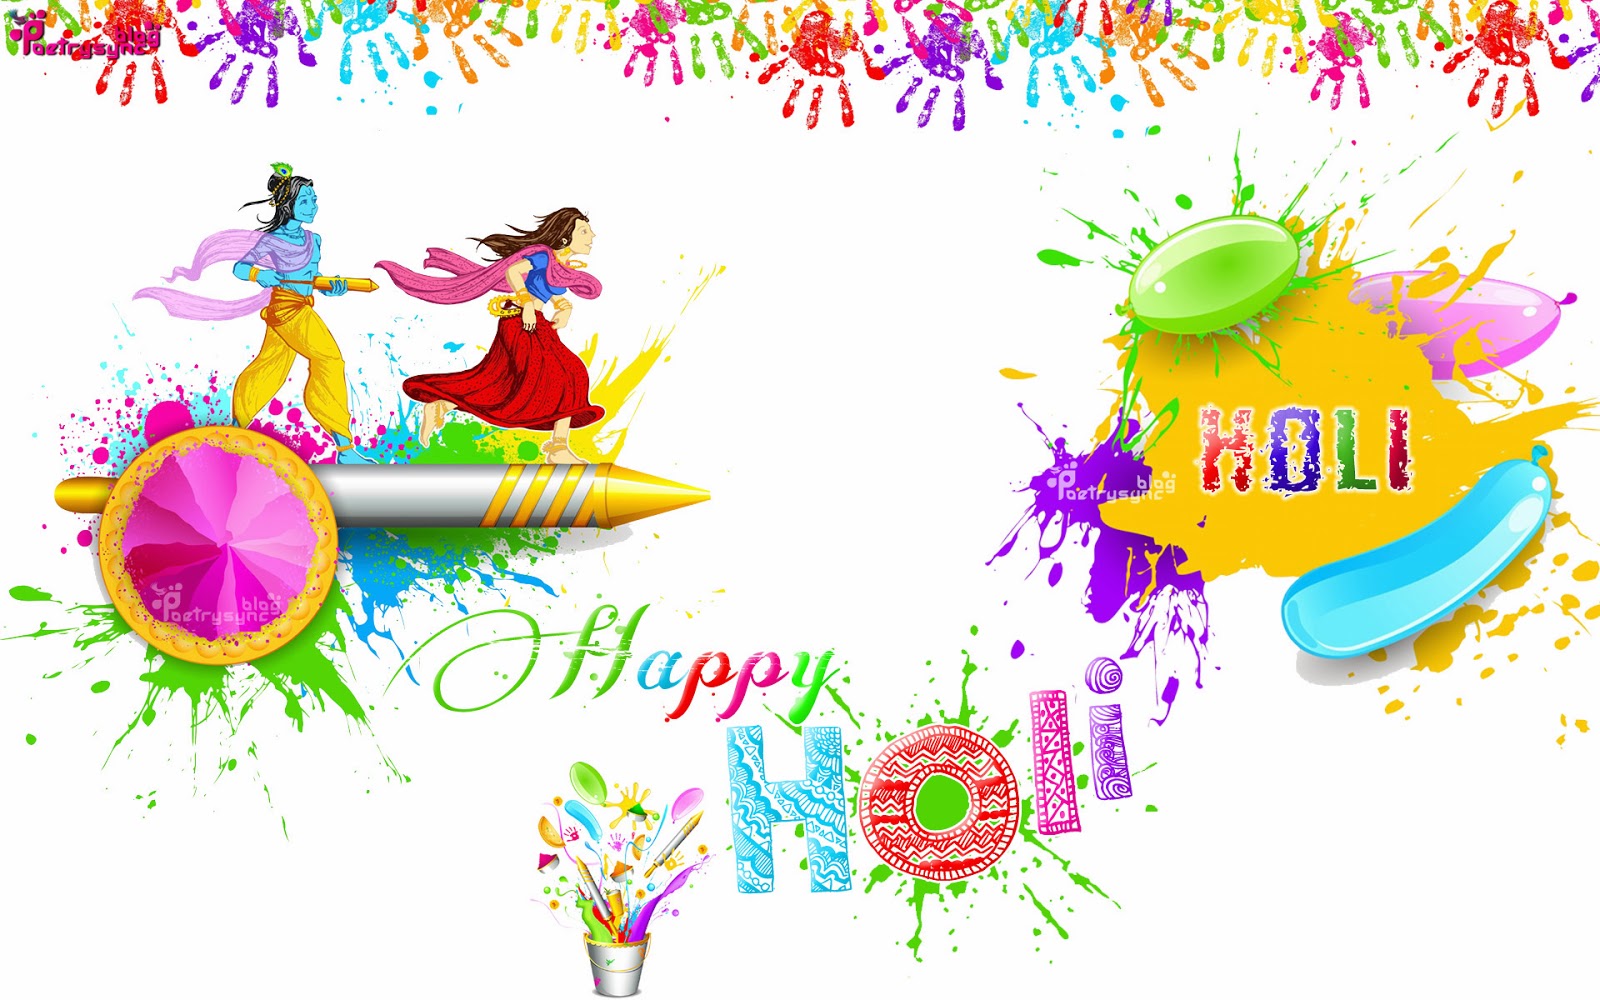 Happy Holi HD Images, Wallpapers, Pics (Free Download) 